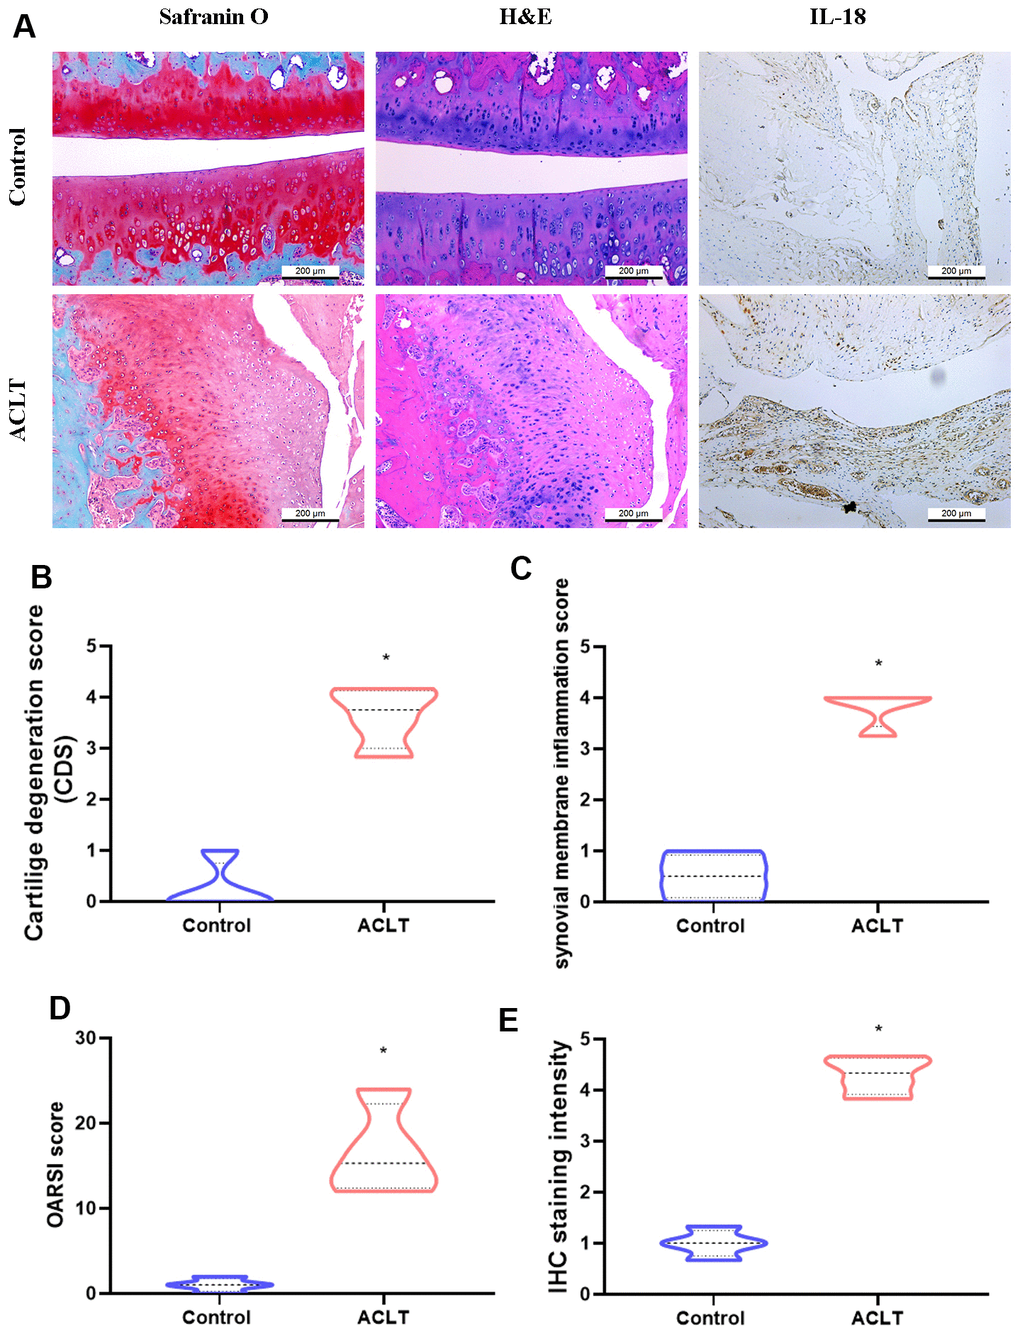 Histologic assessments revealed increases in IL-18 expression in ACLT rats. (A) All rats were sacrificed at 8 weeks after surgery. Paraffin-embedded sections of knee joints were subjected to Safranin O/fast green, H&E, and IHC staining for analyses of IL-18 expression. (B–D) The severity of knee OA was assessed by cartilage degeneration scores (CDS), synovial membrane inflammation scores, and Osteoarthritis Research Society International (OARSI) scores. (E) Levels of IL-18 expression were evaluated by the intensity of IHC staining. Results are expressed as the means ± S.D. *p